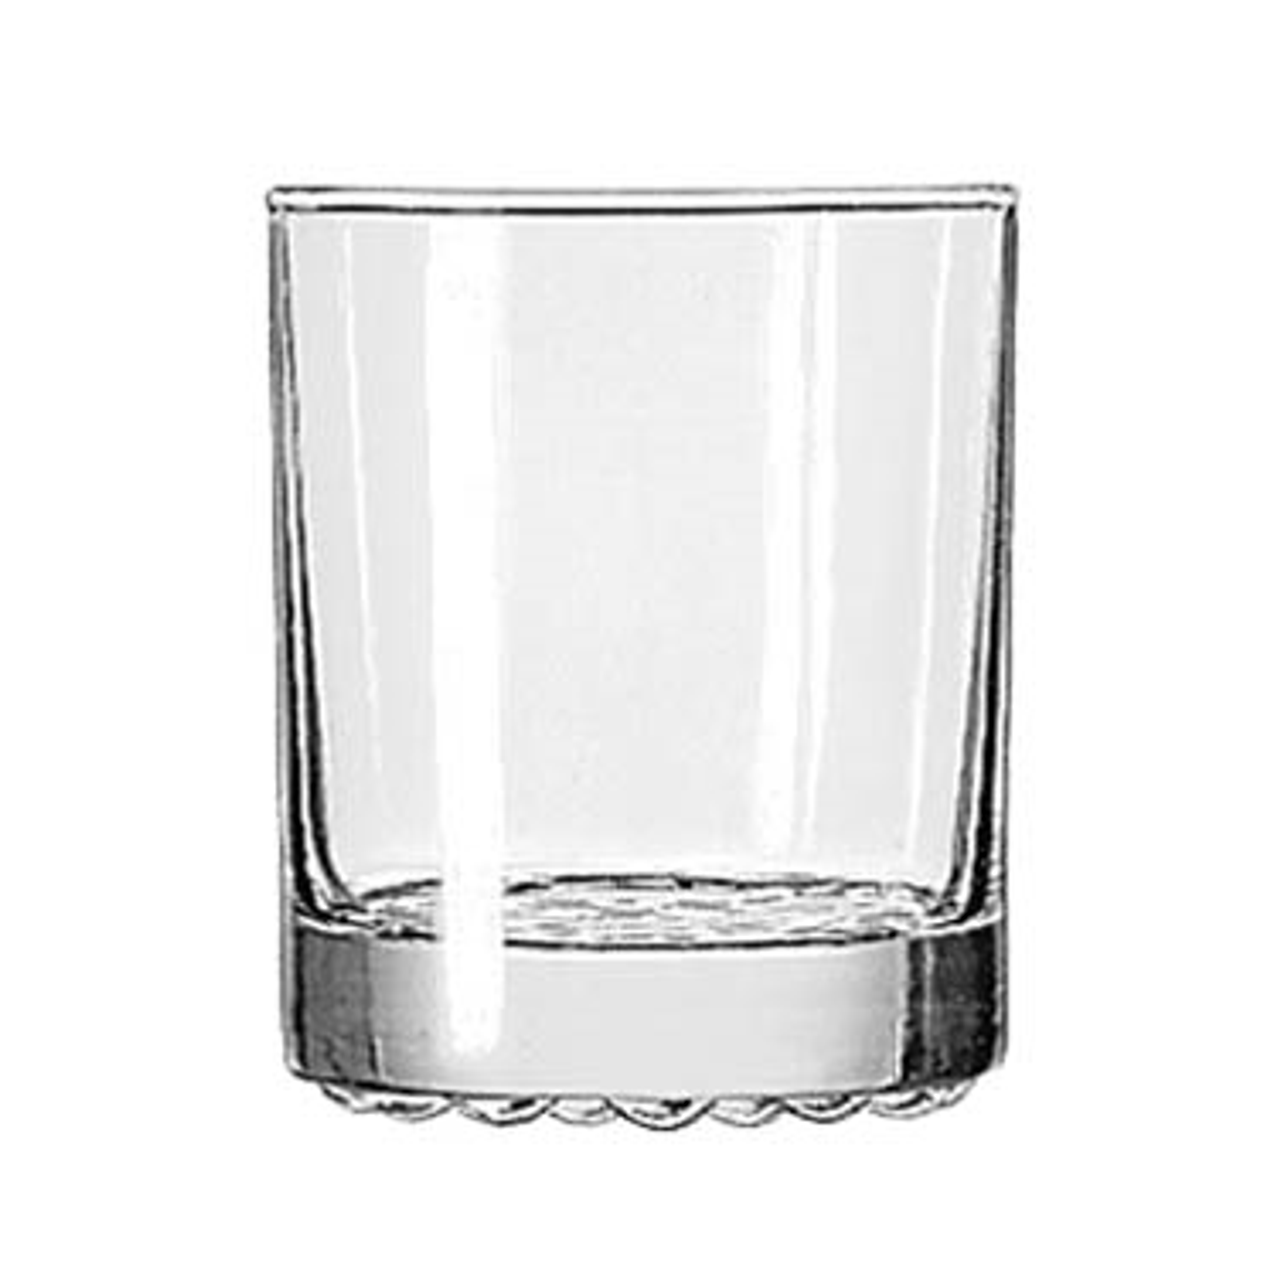 https://cdn11.bigcommerce.com/s-g3i86bef61/images/stencil/1280x1280/products/1116/2139/Libbey-23286-Nob-Hill-Old-Fashioned-Glass__80883.1663869472.png?c=1